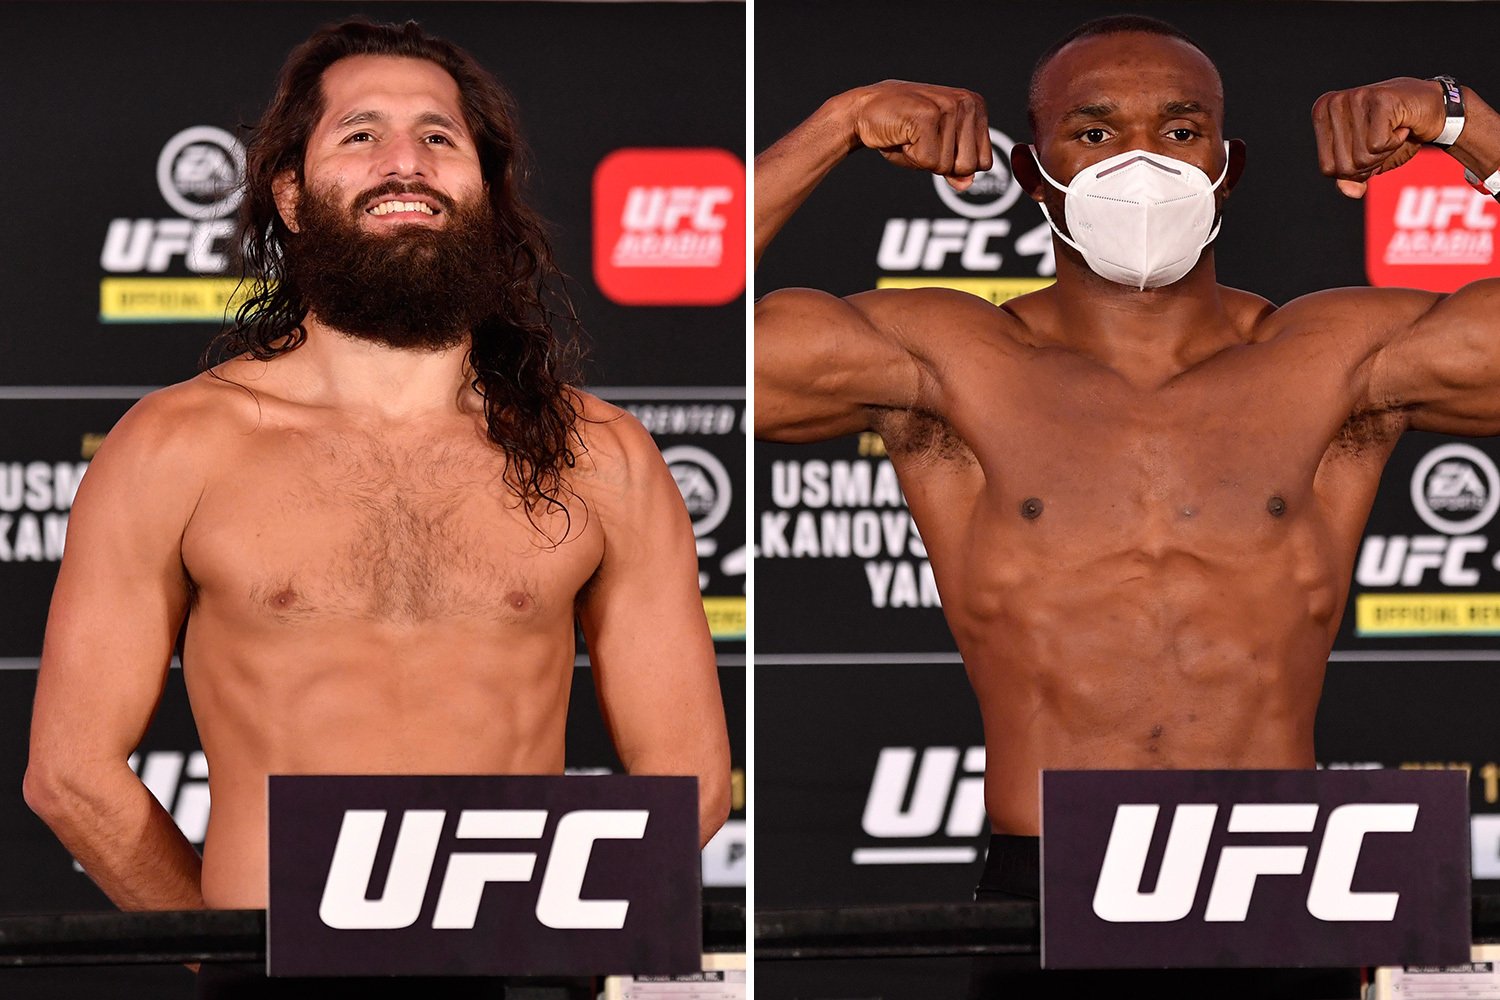 Usman rates UFC 251 rival Masvidal 'biggest, baddest' opponent EVER at weigh-in